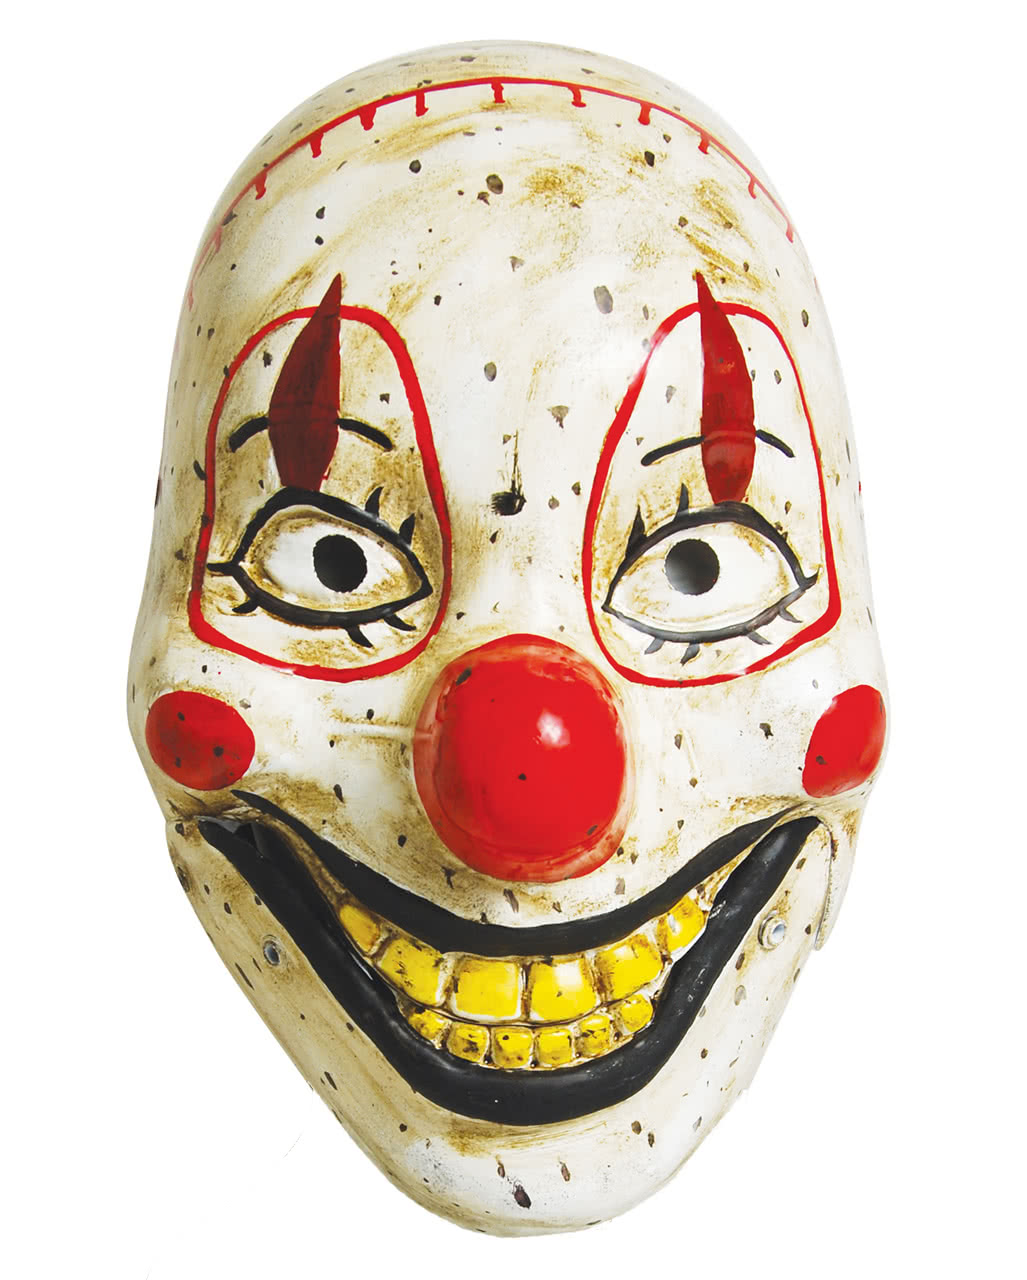 scary clown dolls for sale